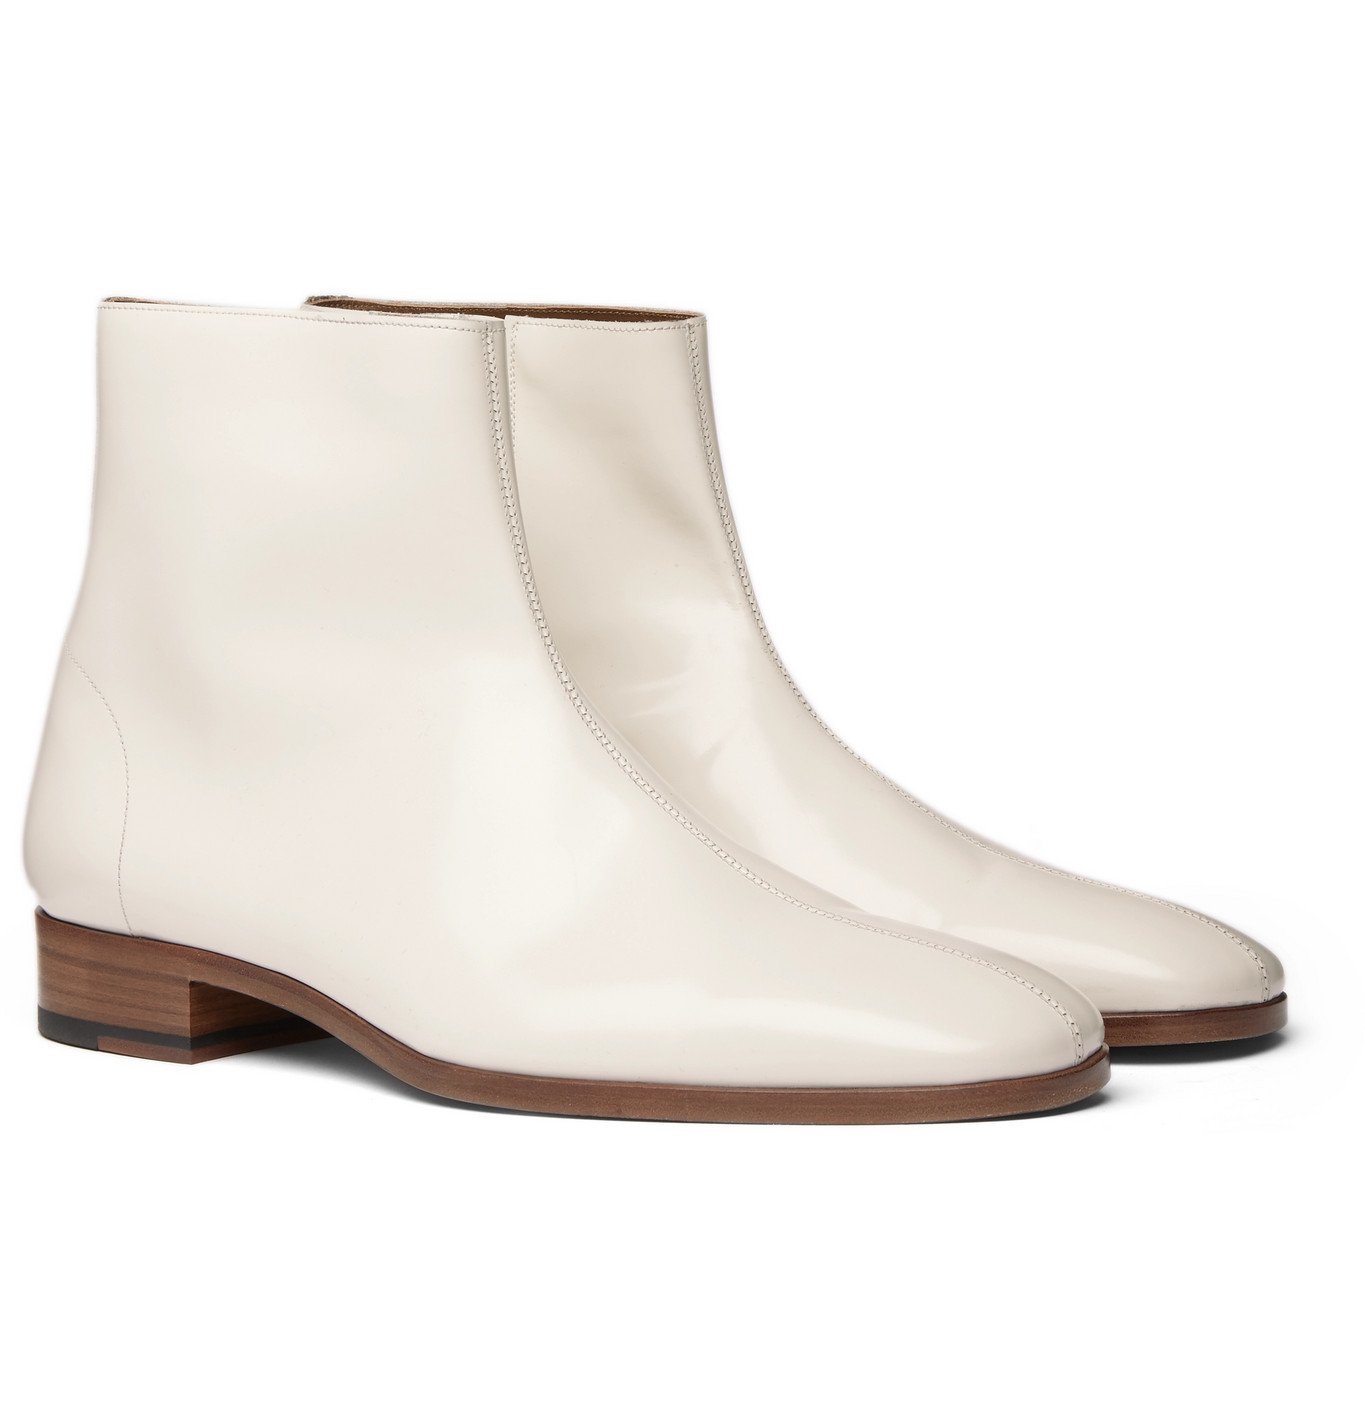 TOM FORD - Midland Patent-Leather Boots - White TOM FORD